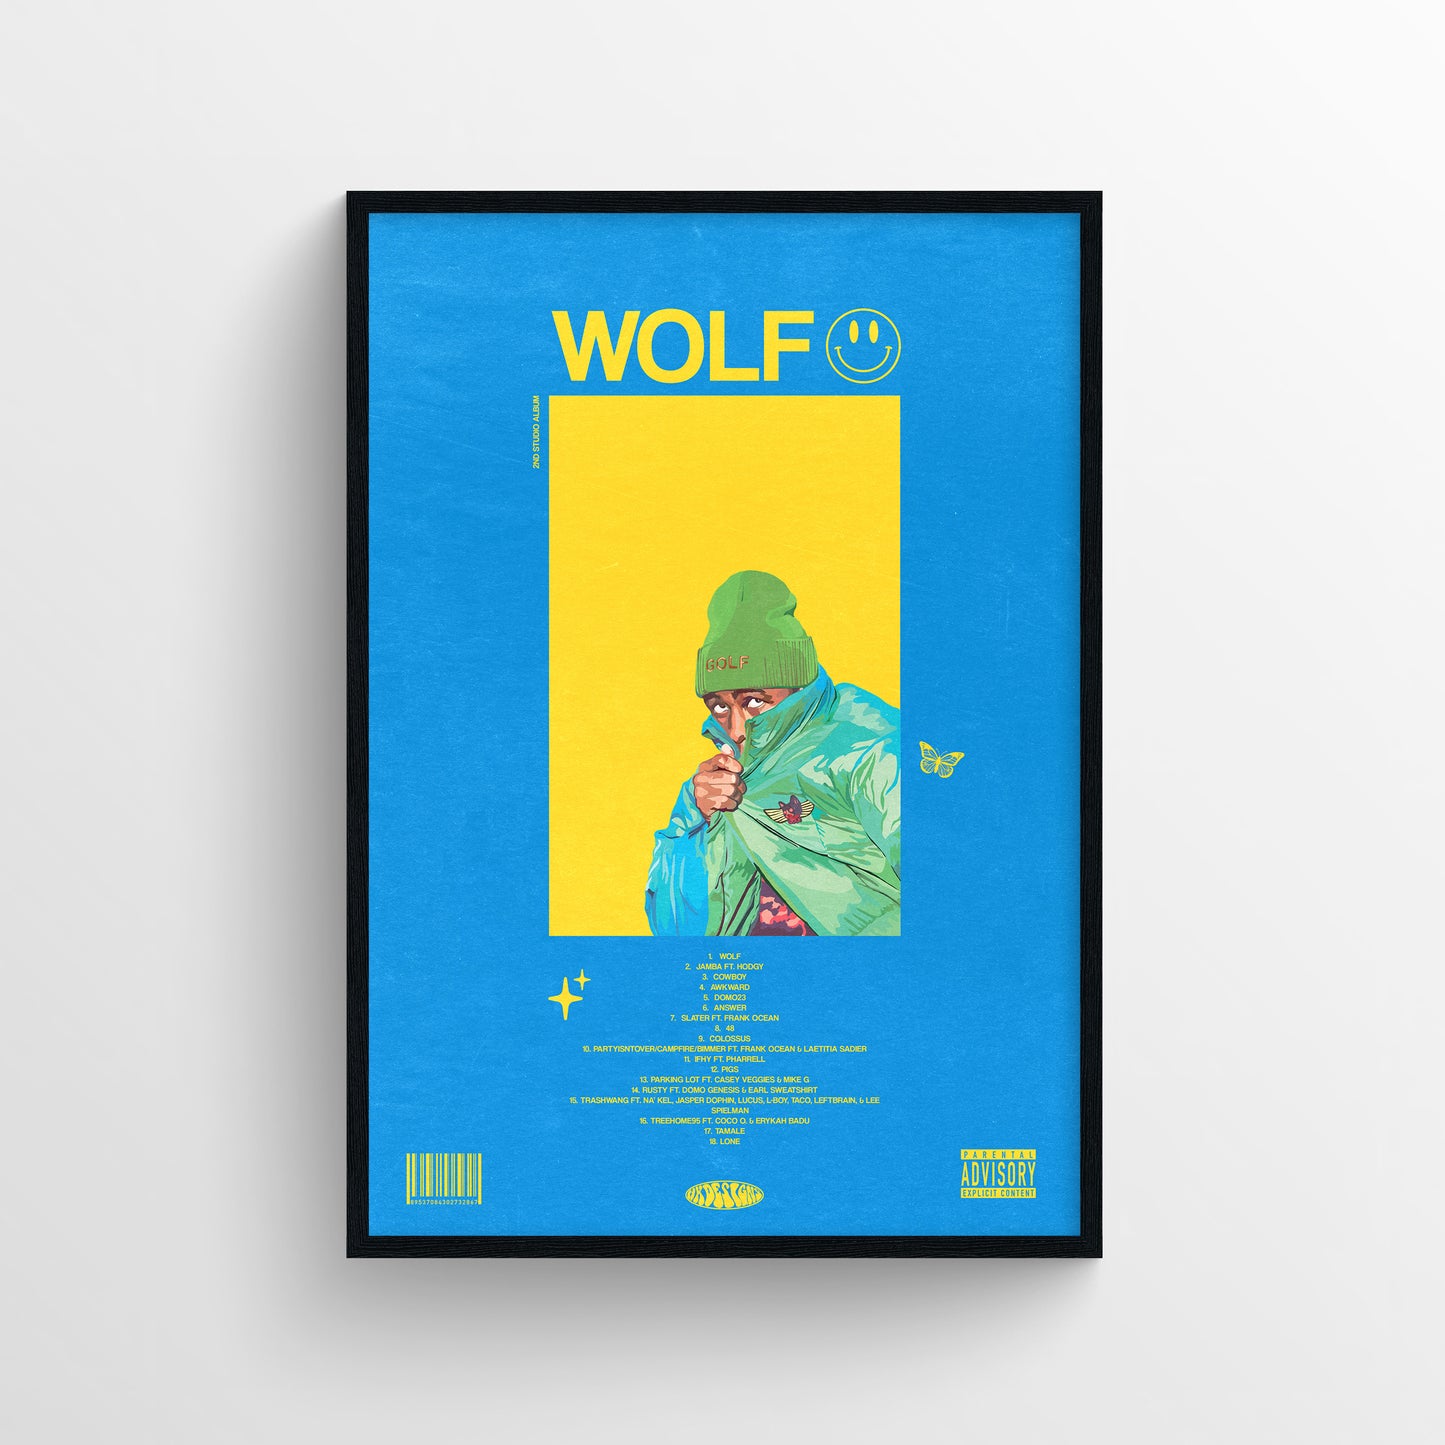 'WOLF' by Tyler the Creator